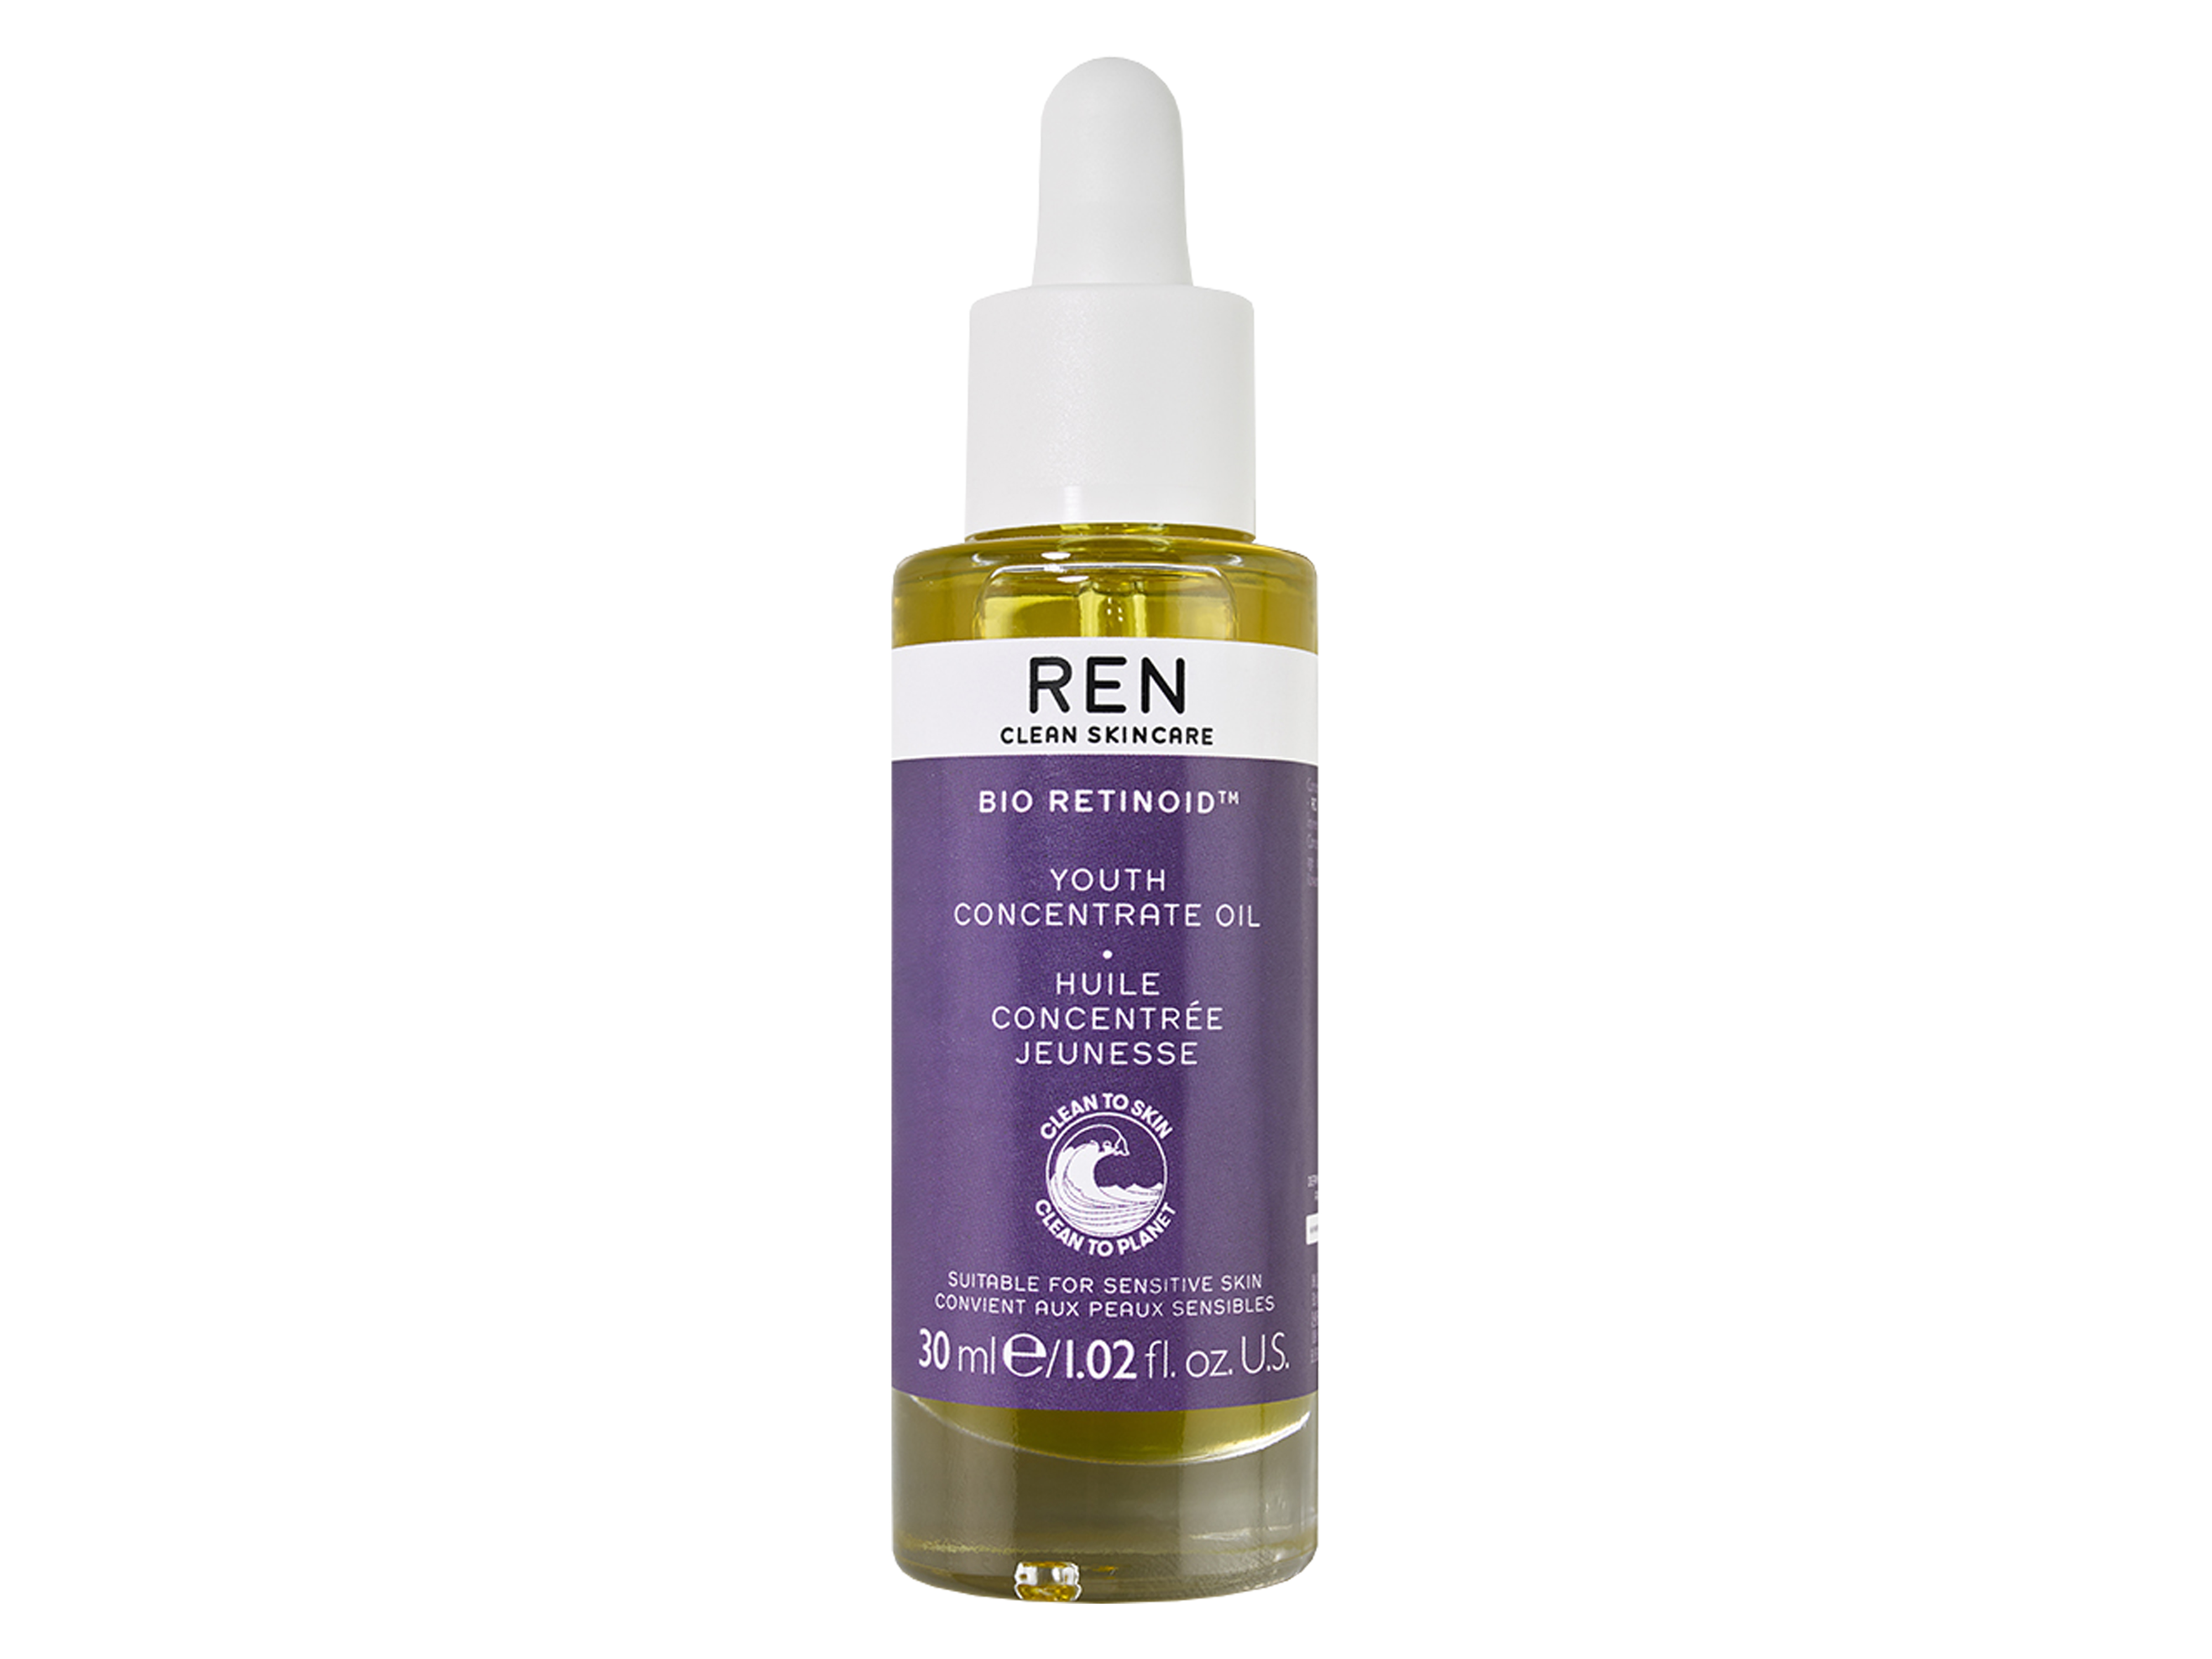 REN BIO RETINOID Youth Concentrate Oil, 30 ml